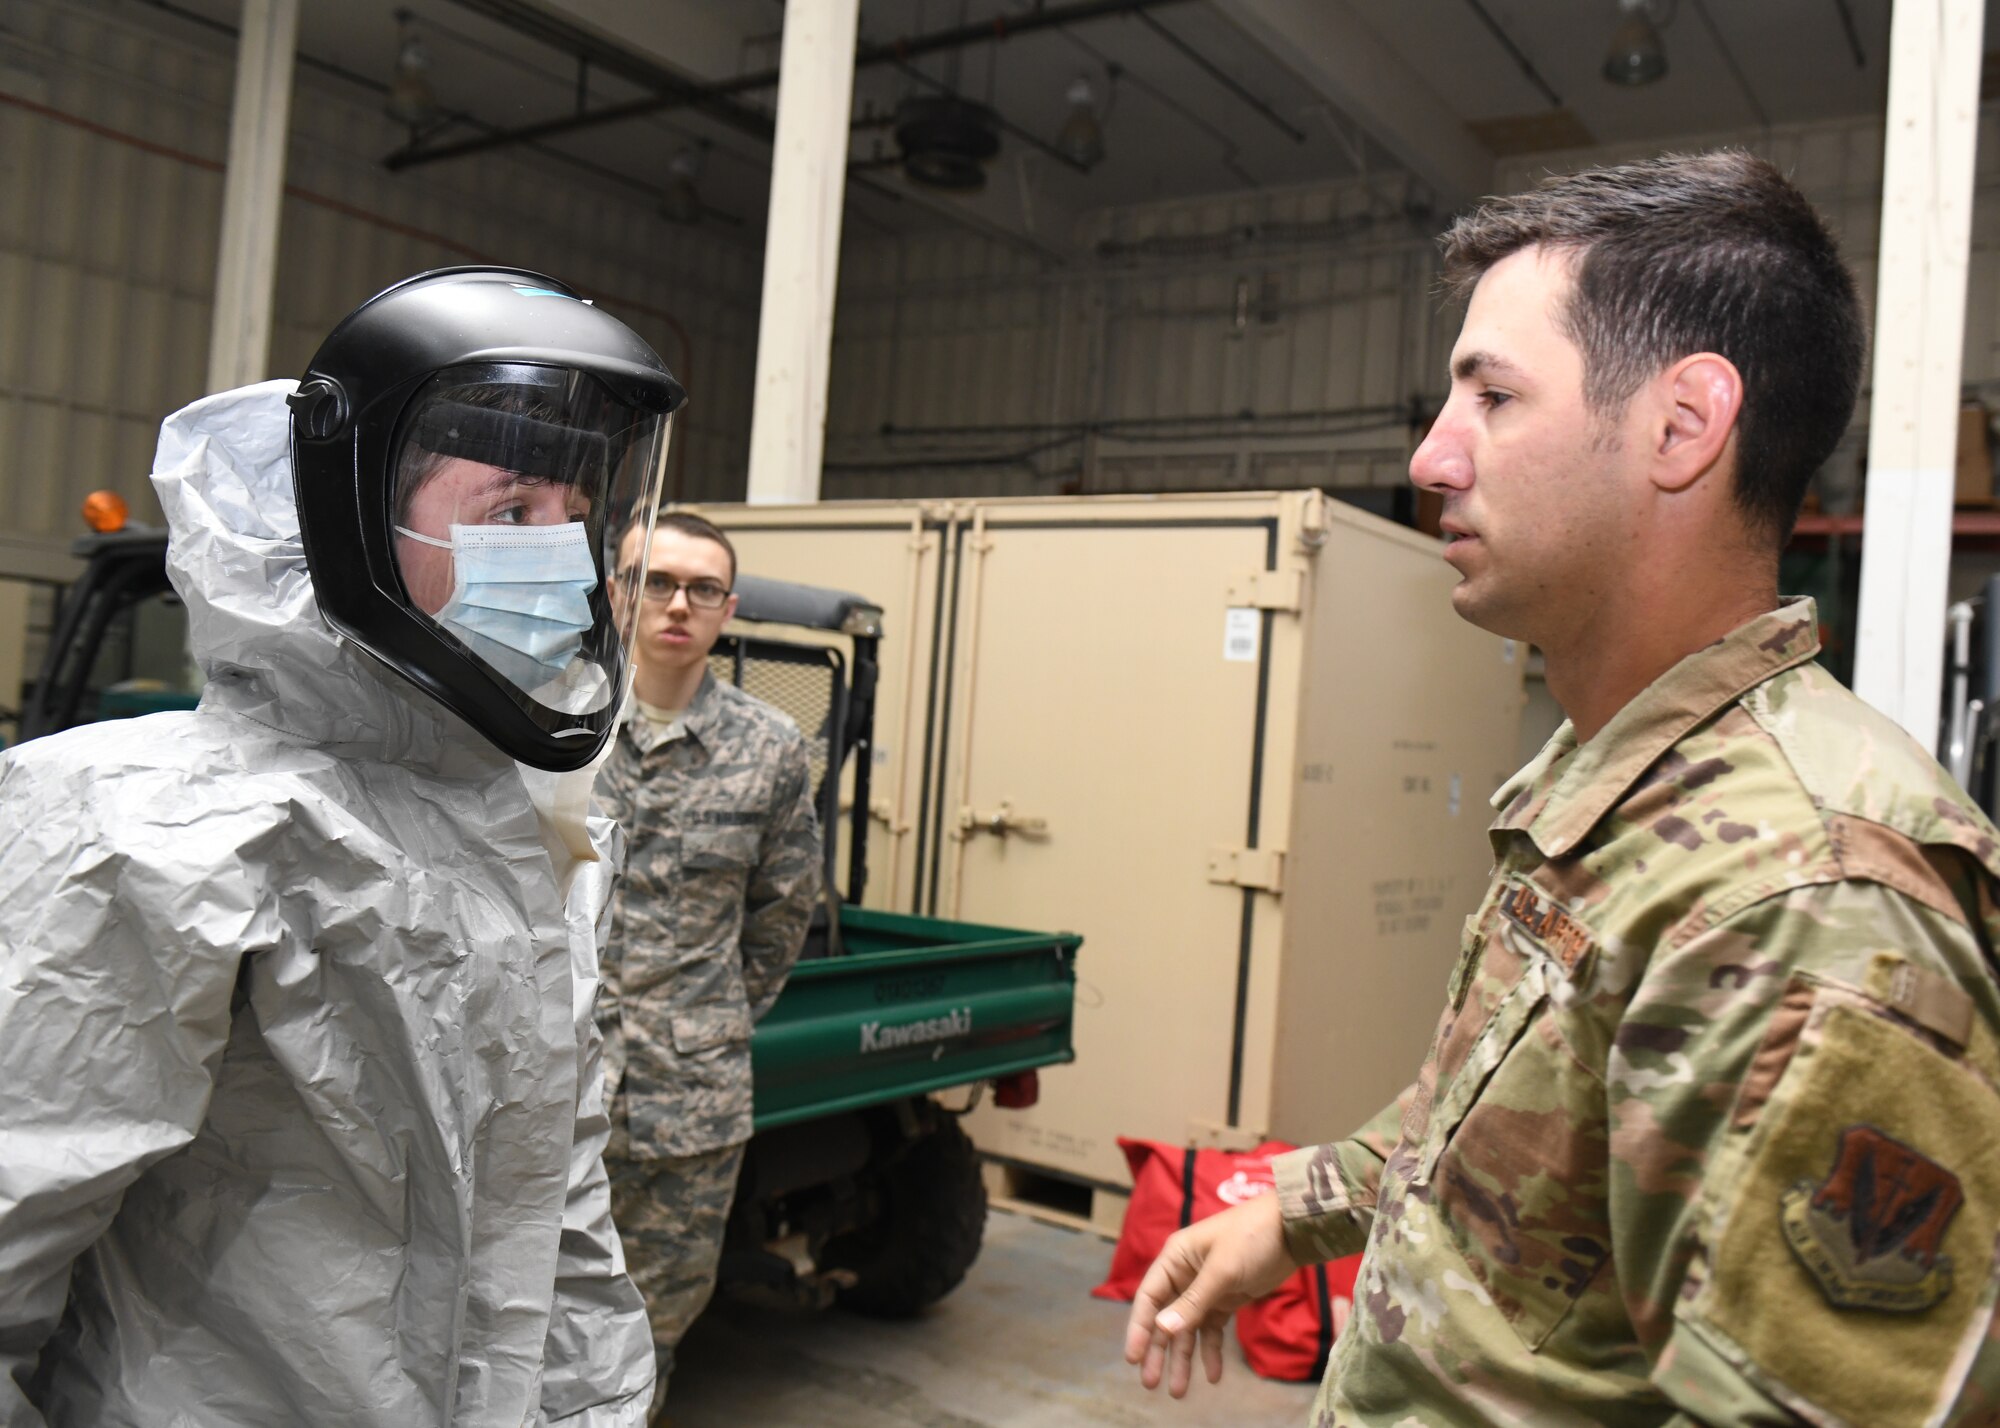 Senior Airman Dennis McAnnally, 9th Operational Medical Readiness Squadron Bioenviromental Engineering technician, right, inspects an Airman’s personal protective equipment (PPE), Mar. 28, 2020 at Beale Air Force Base, California. The training provided hands-on experience on properly donning PPE. (U.S. Air Force photo by Airman Luis A. Ruiz-Vazquez)